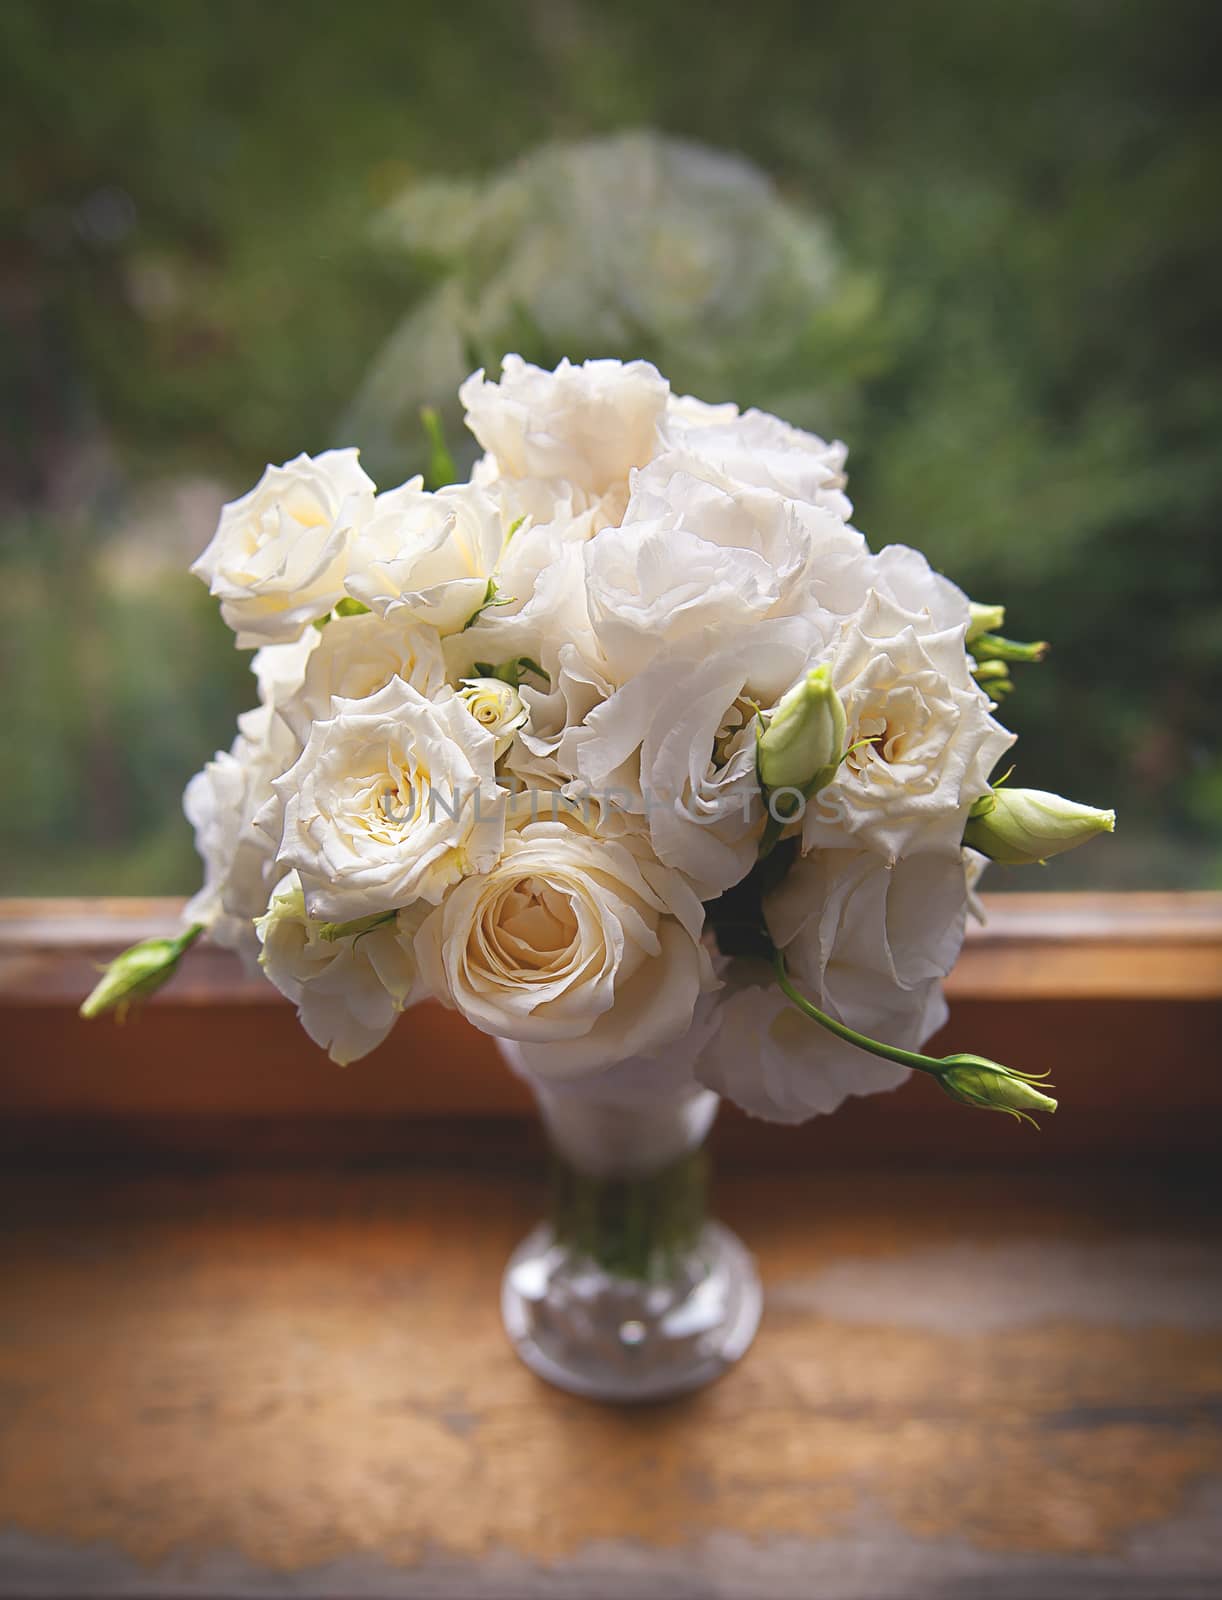 Beautiful white Roses in a glass vase near window. by sfinks